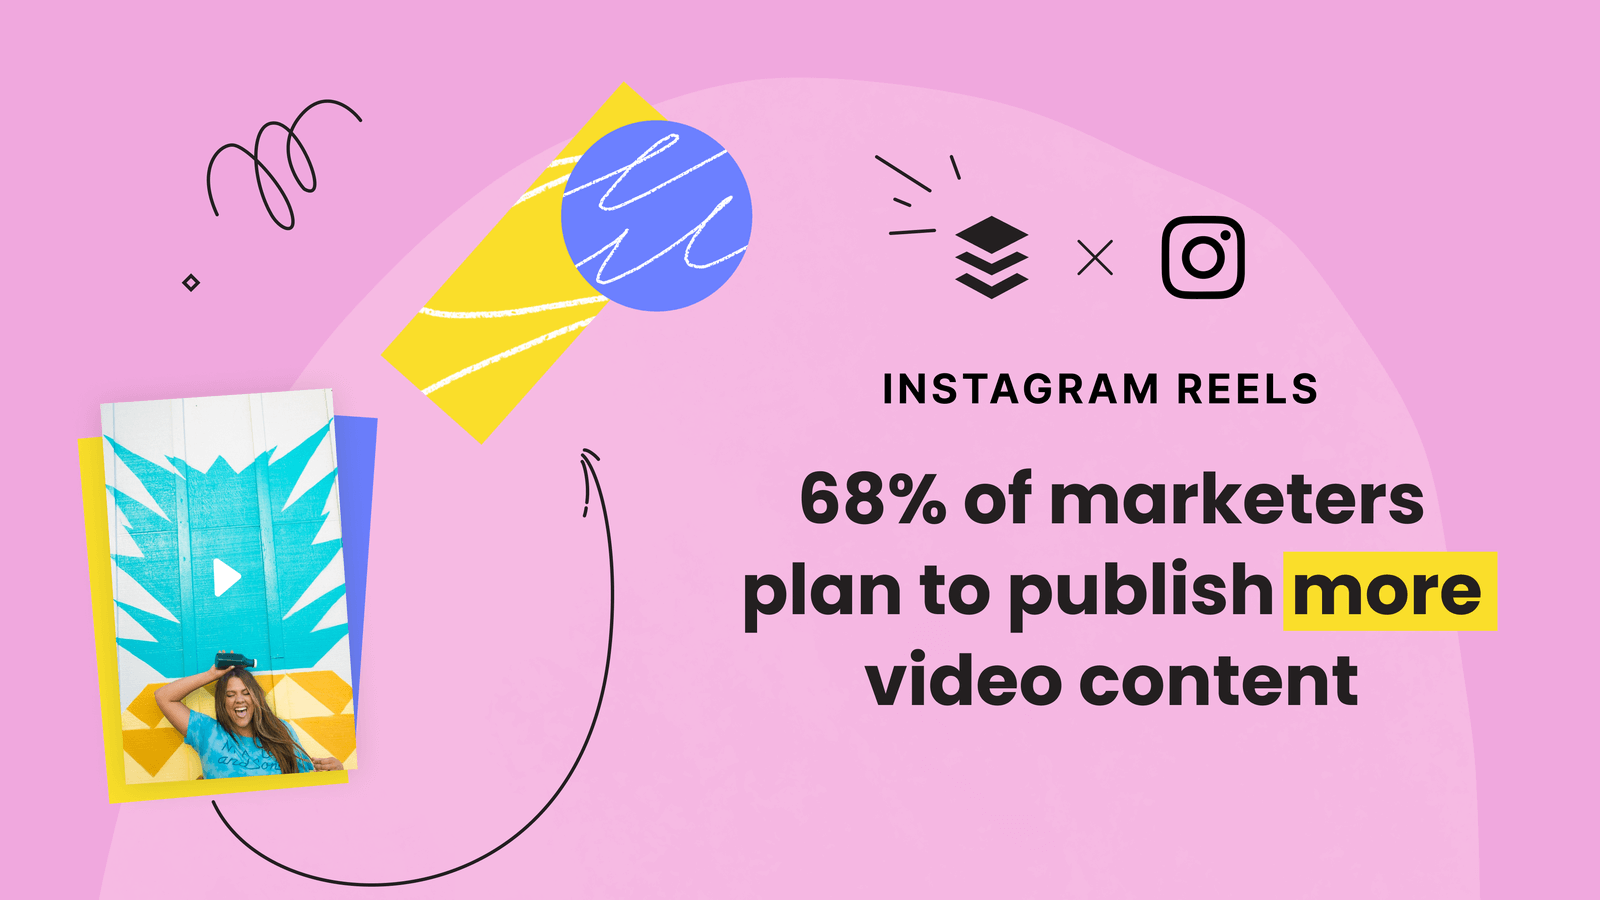 68% of marketers plan to publish more video content on Instagram